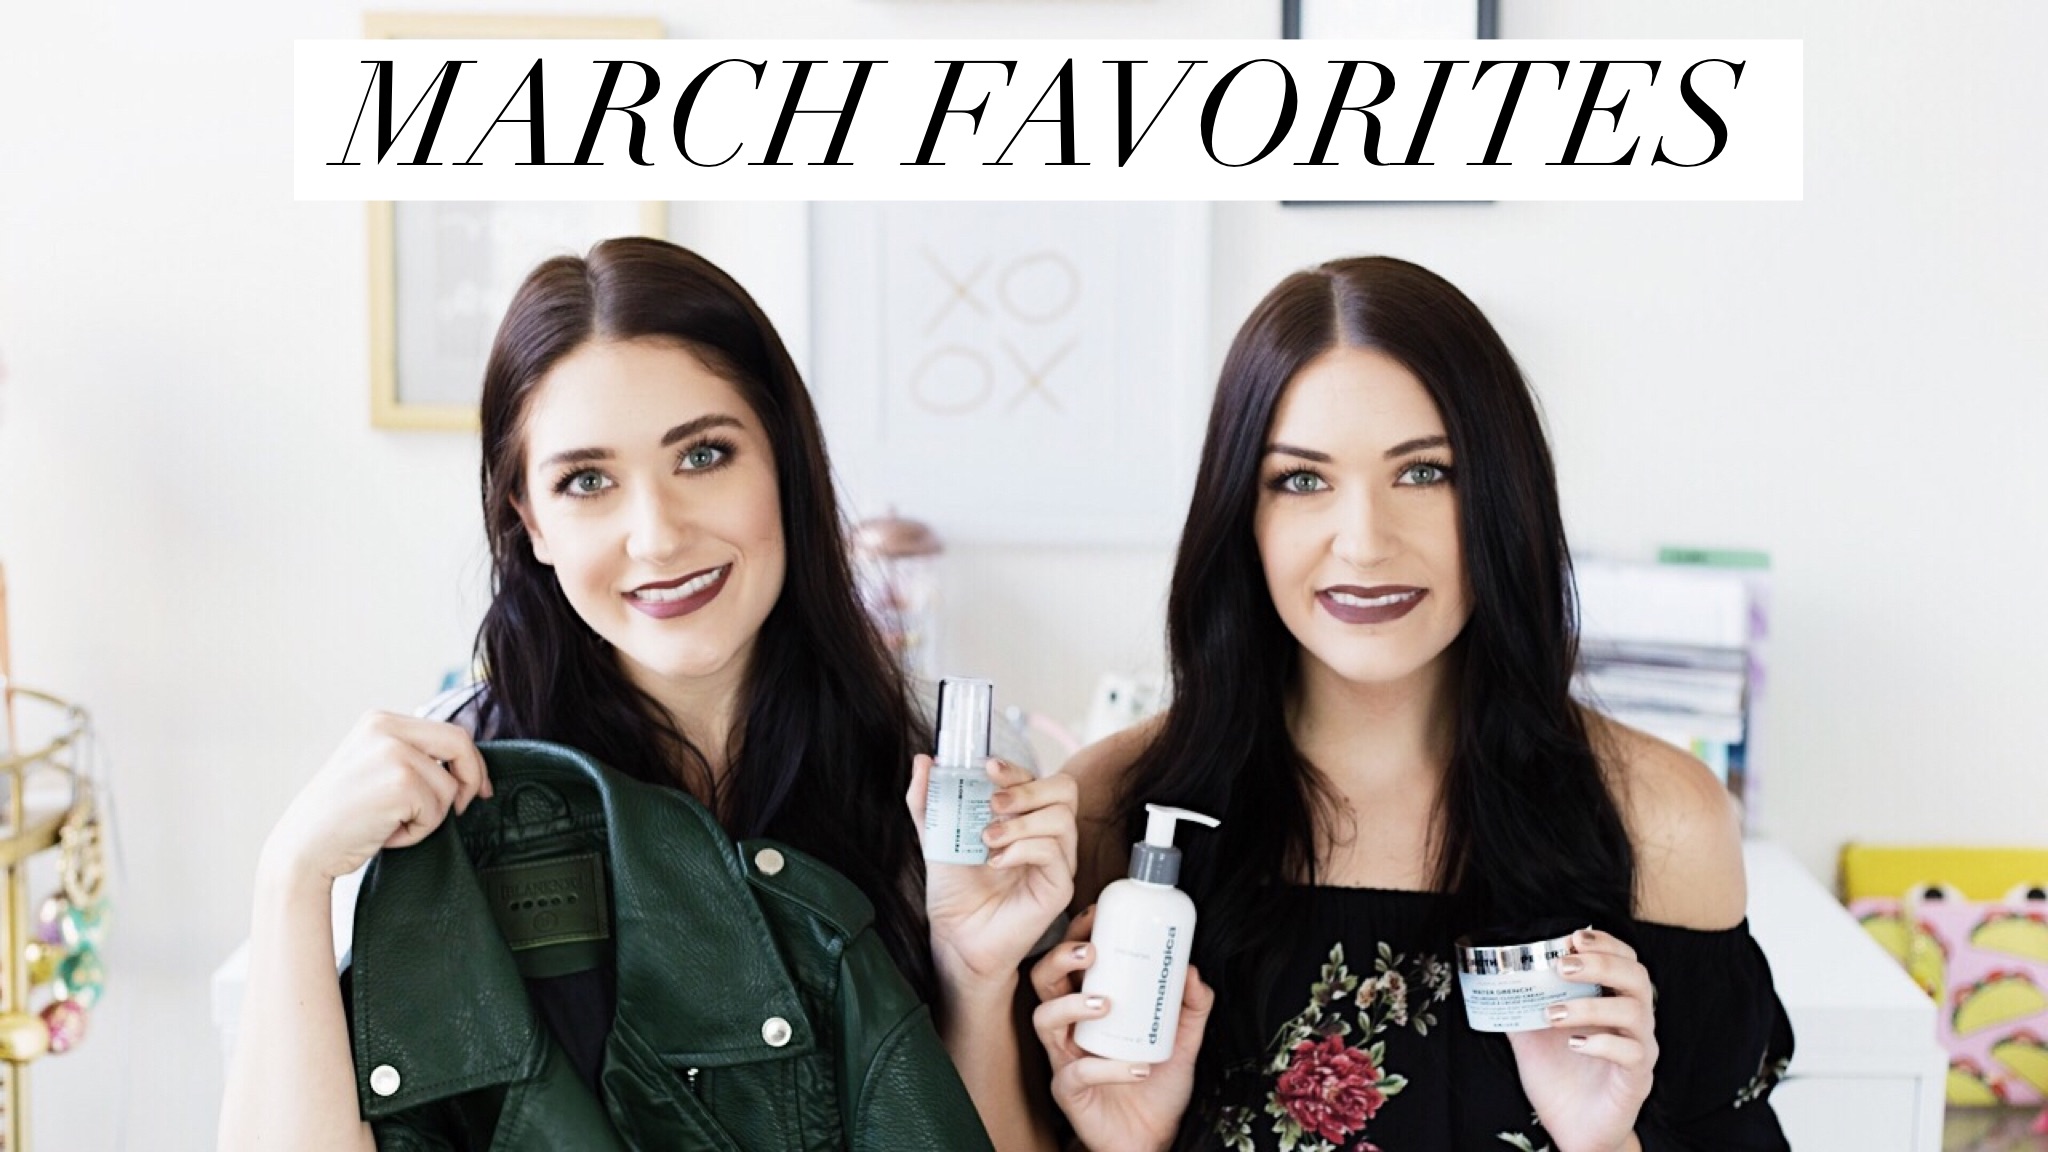 March Favorites | Twinspiration